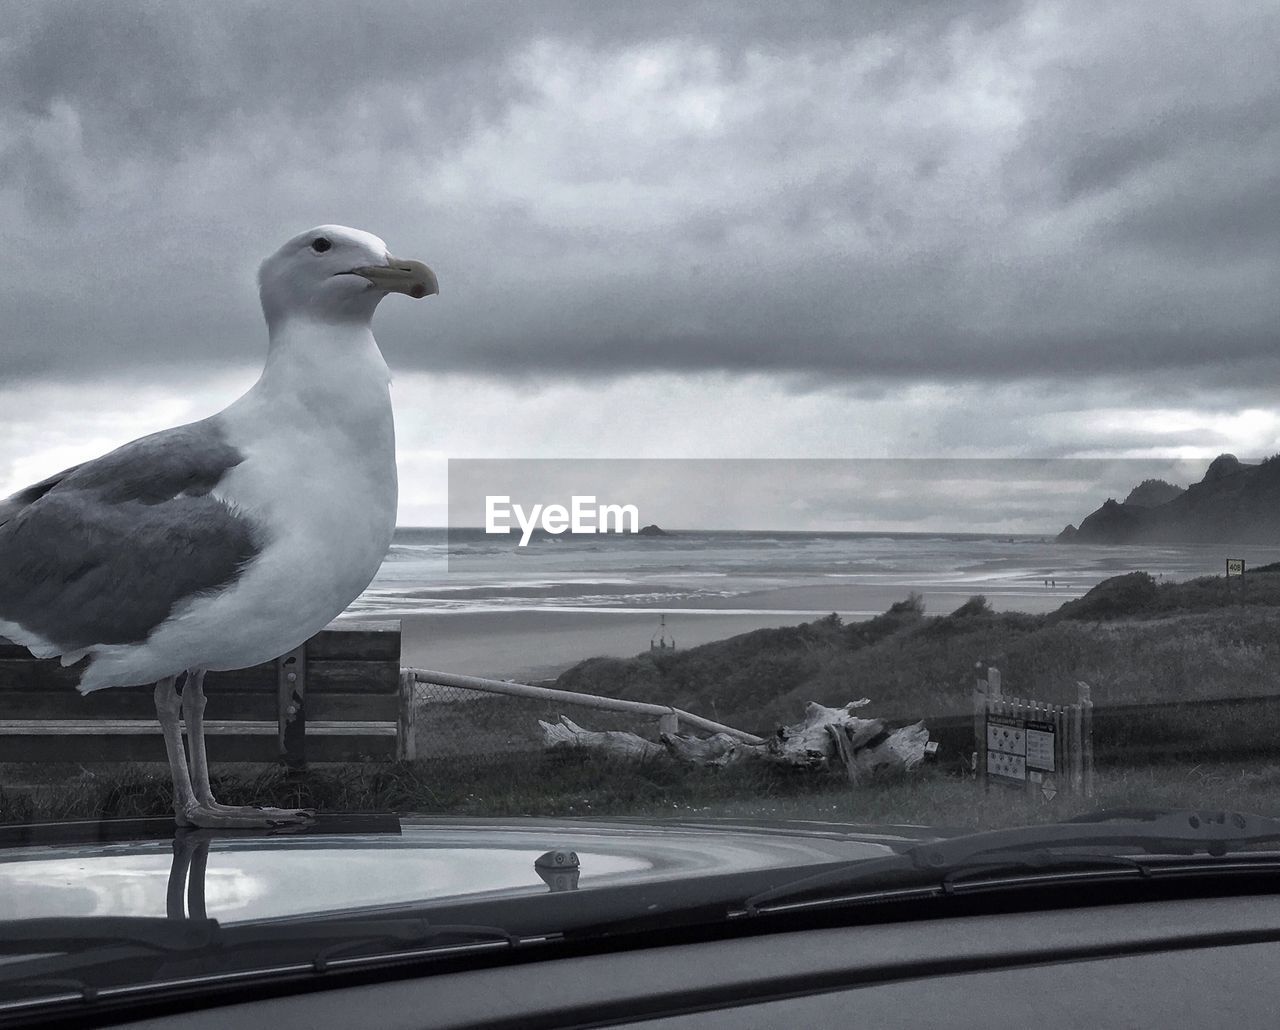 CLOSE-UP OF SEAGULL PERCHING ON CAR